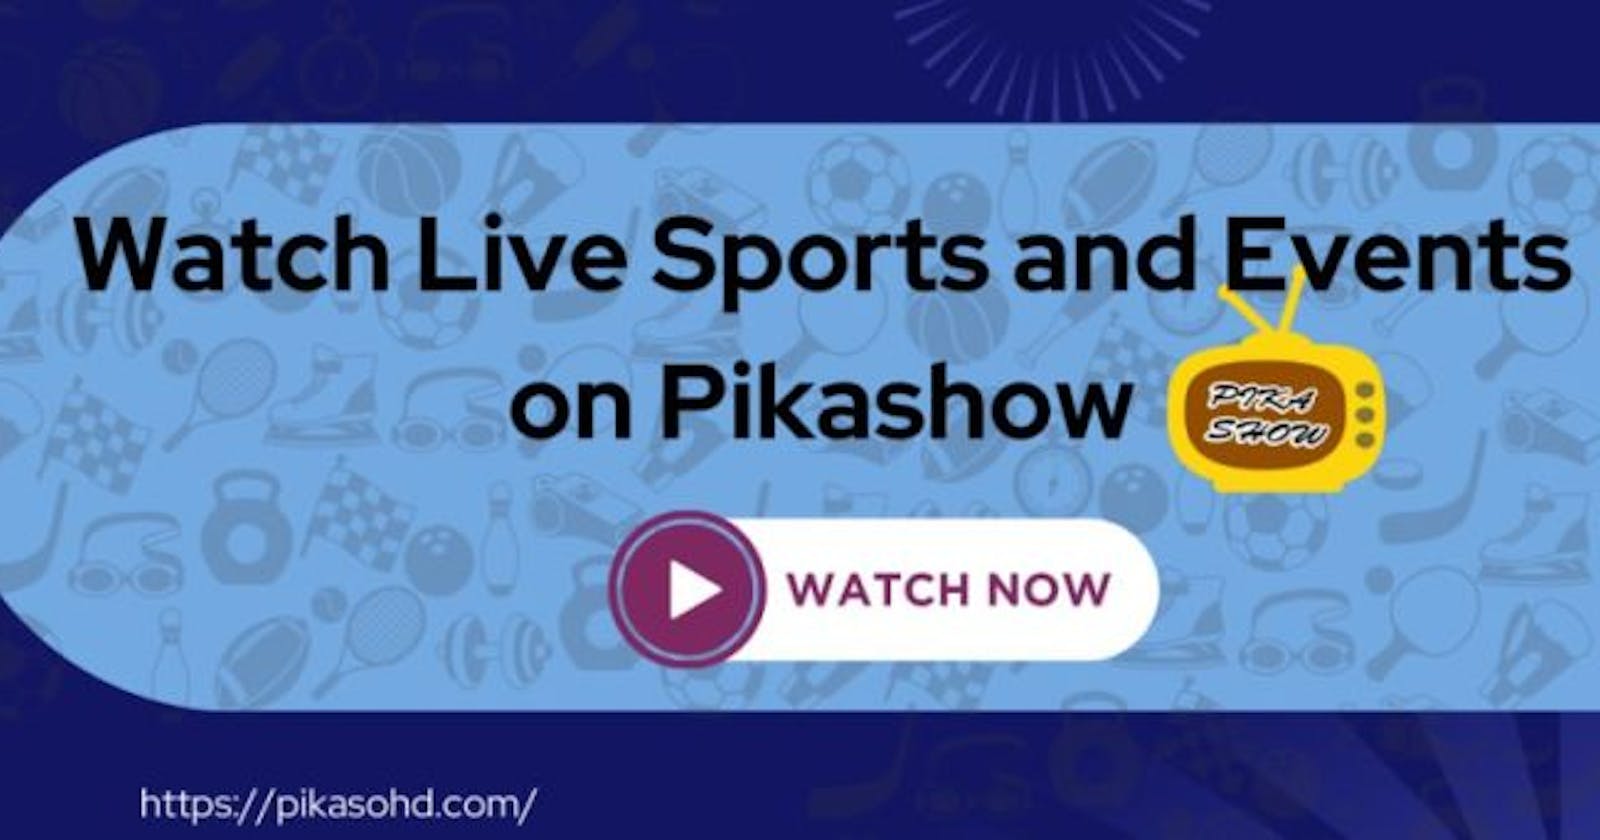 Watch Live Sports and Events on Pikashow